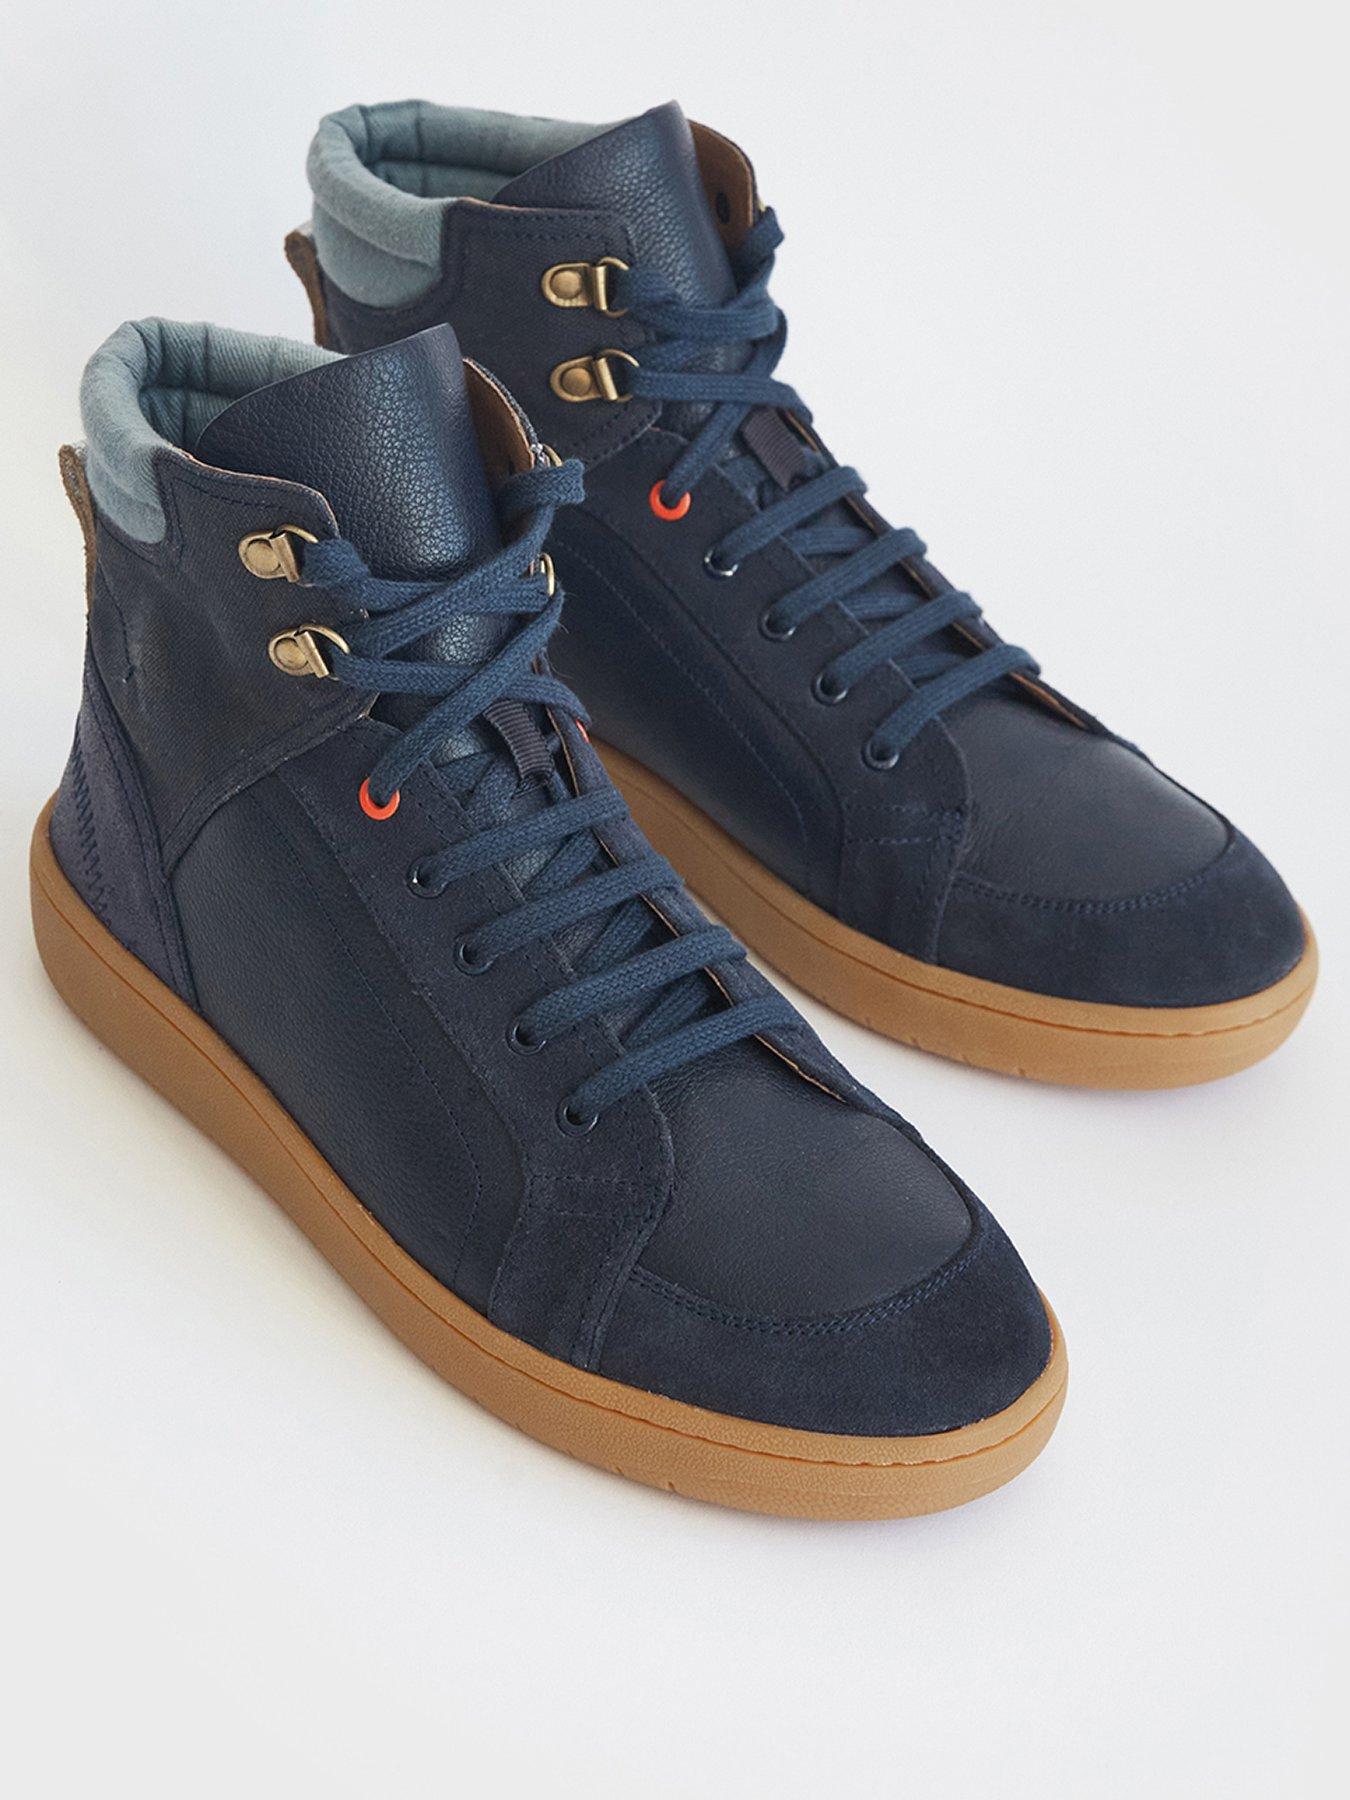  Leather High Top Trainer - Navy